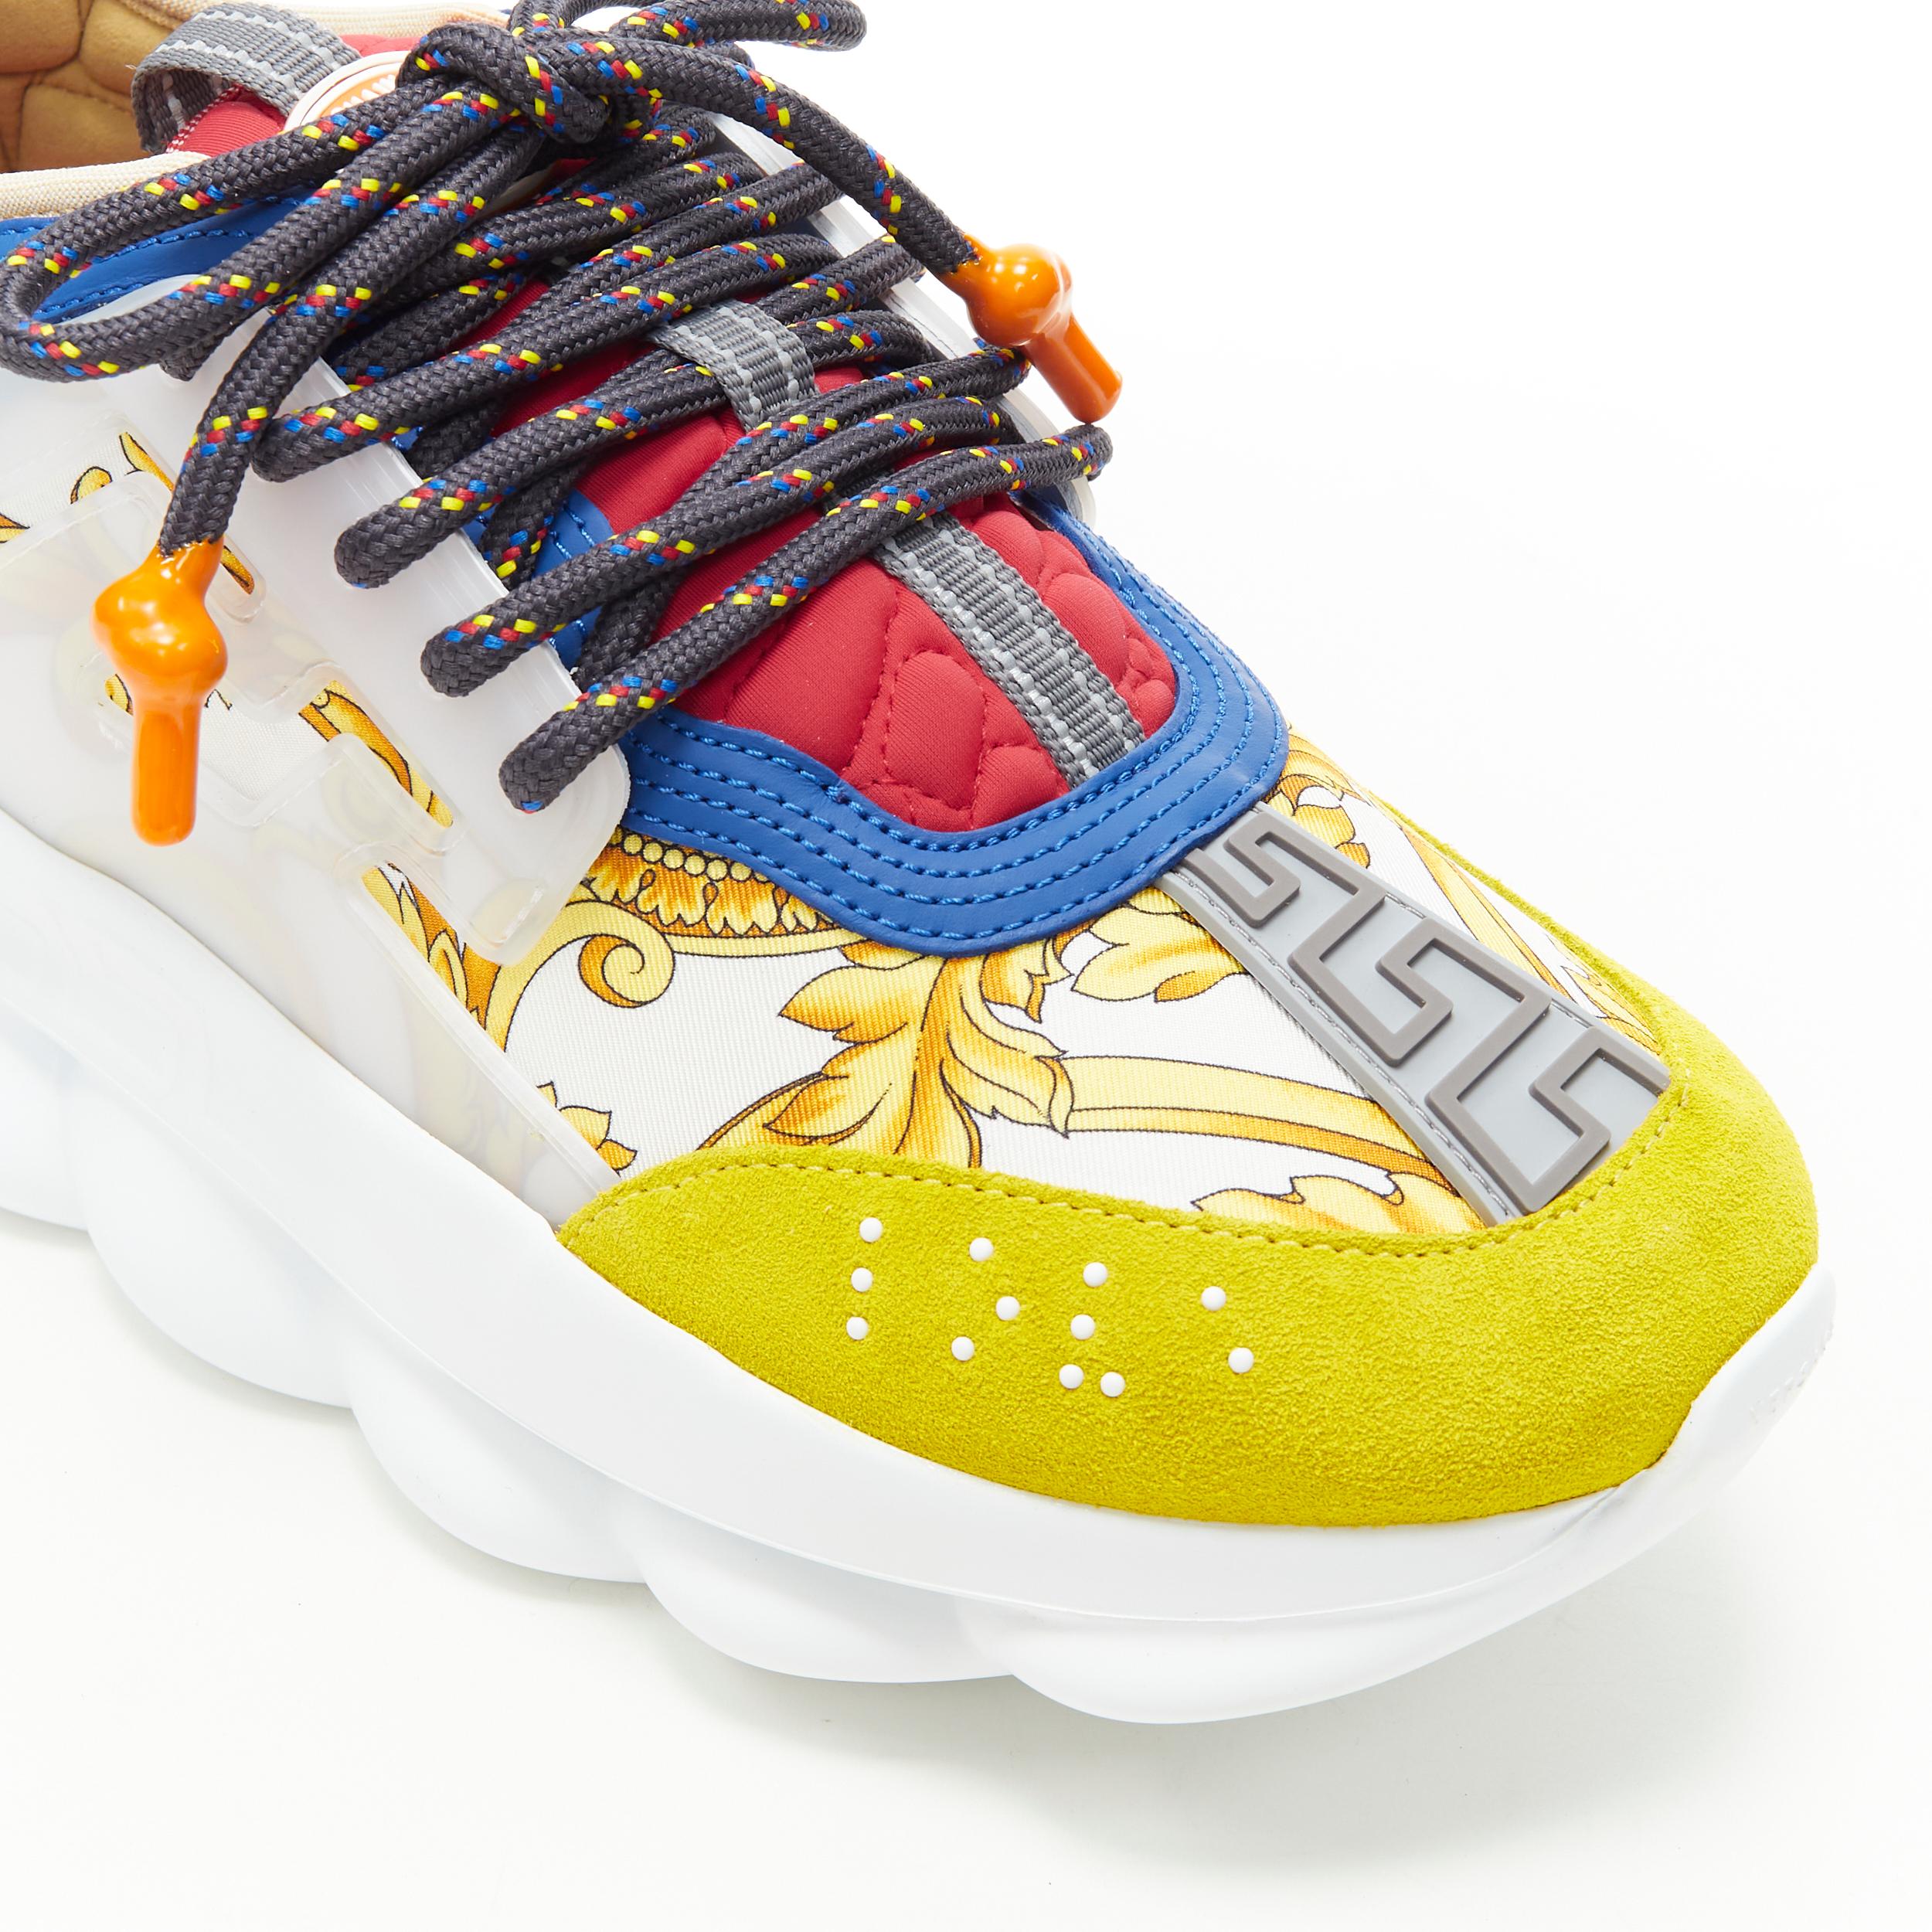 new VERSACE Chain Reaction gold barocco twill yellow blue suede sneaker EU42 US9 3